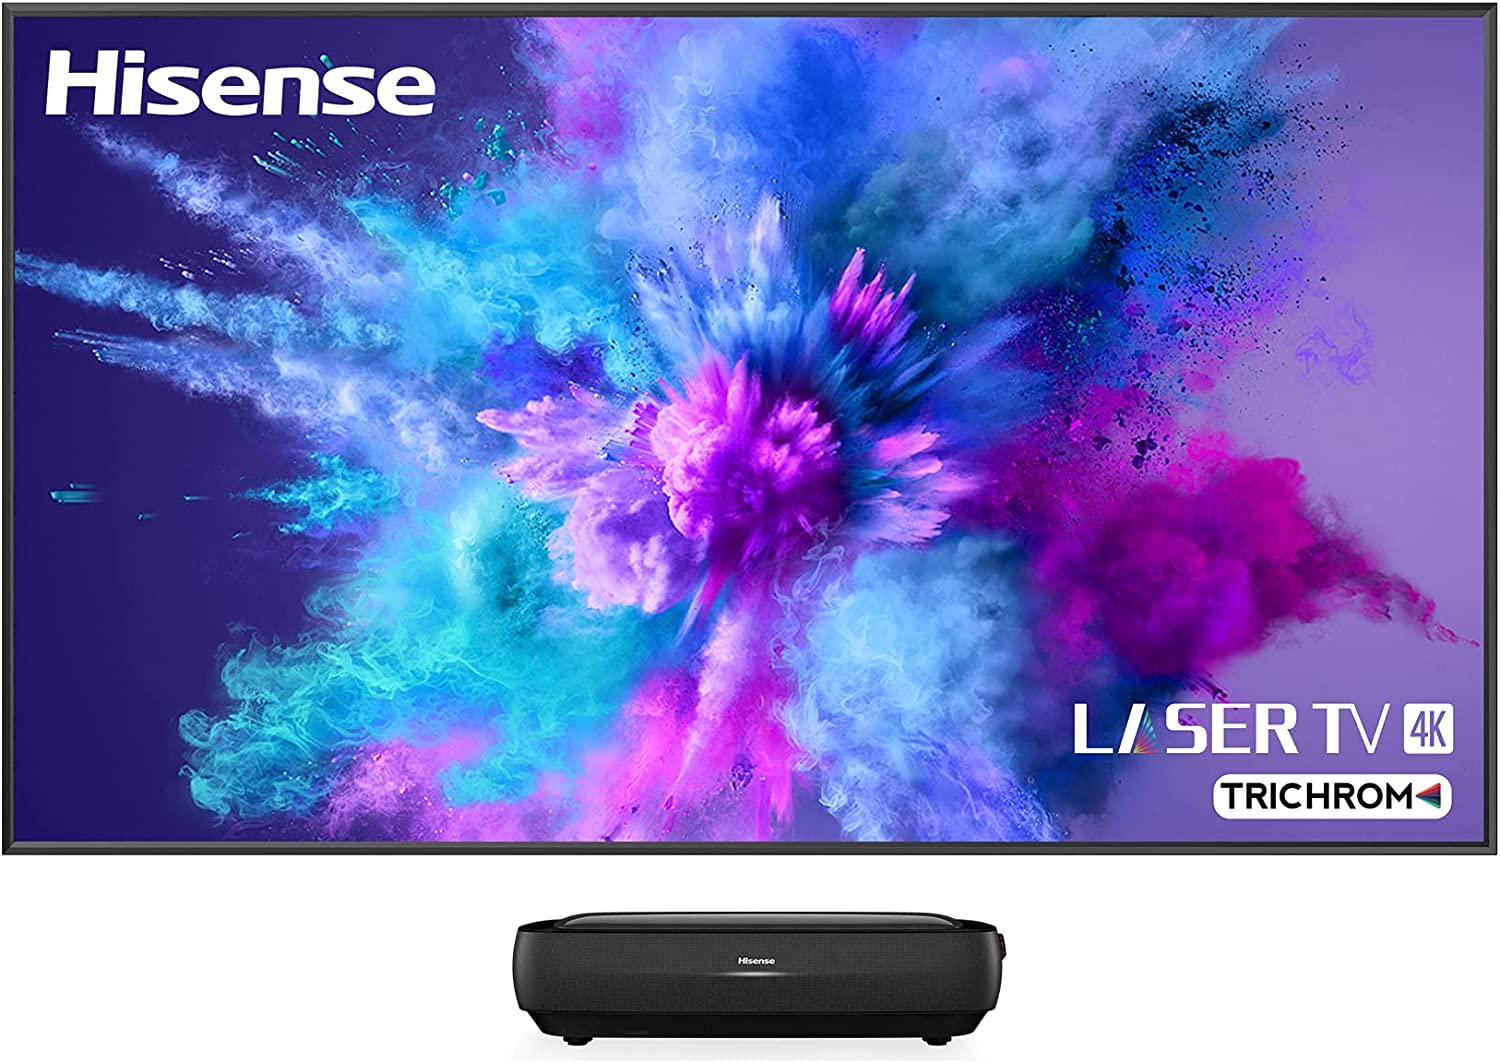 Because Hisense is a newer TV brand, it offers a 100-day money-back guarantee.